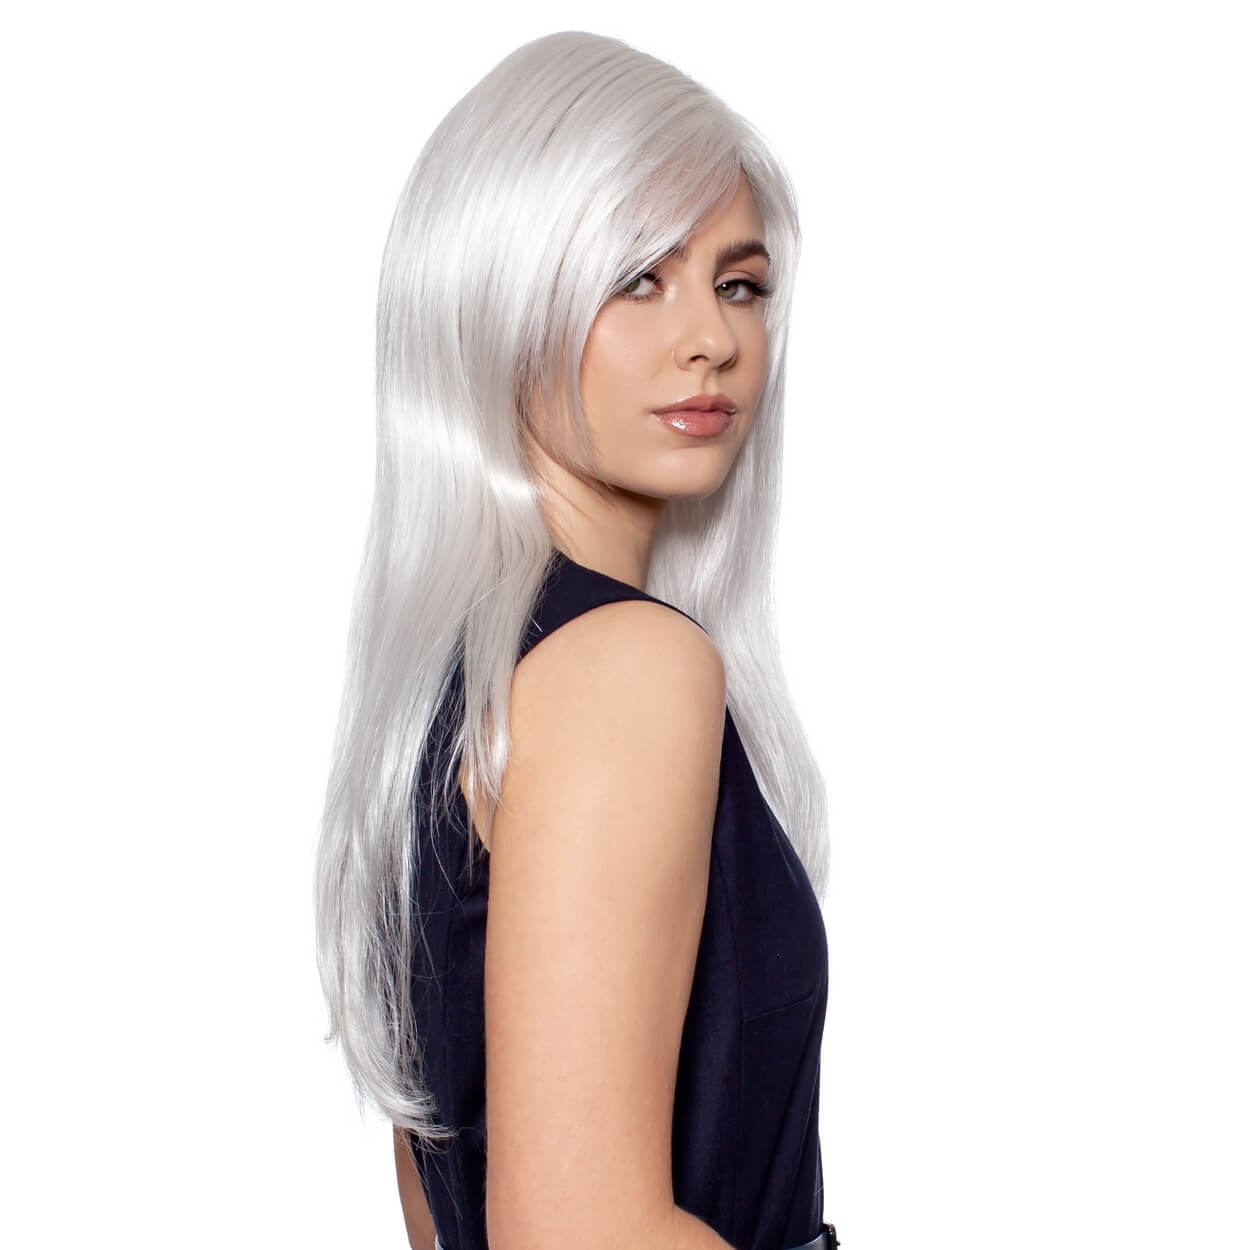 Heather II by Wig Pro in White Fox Image 2